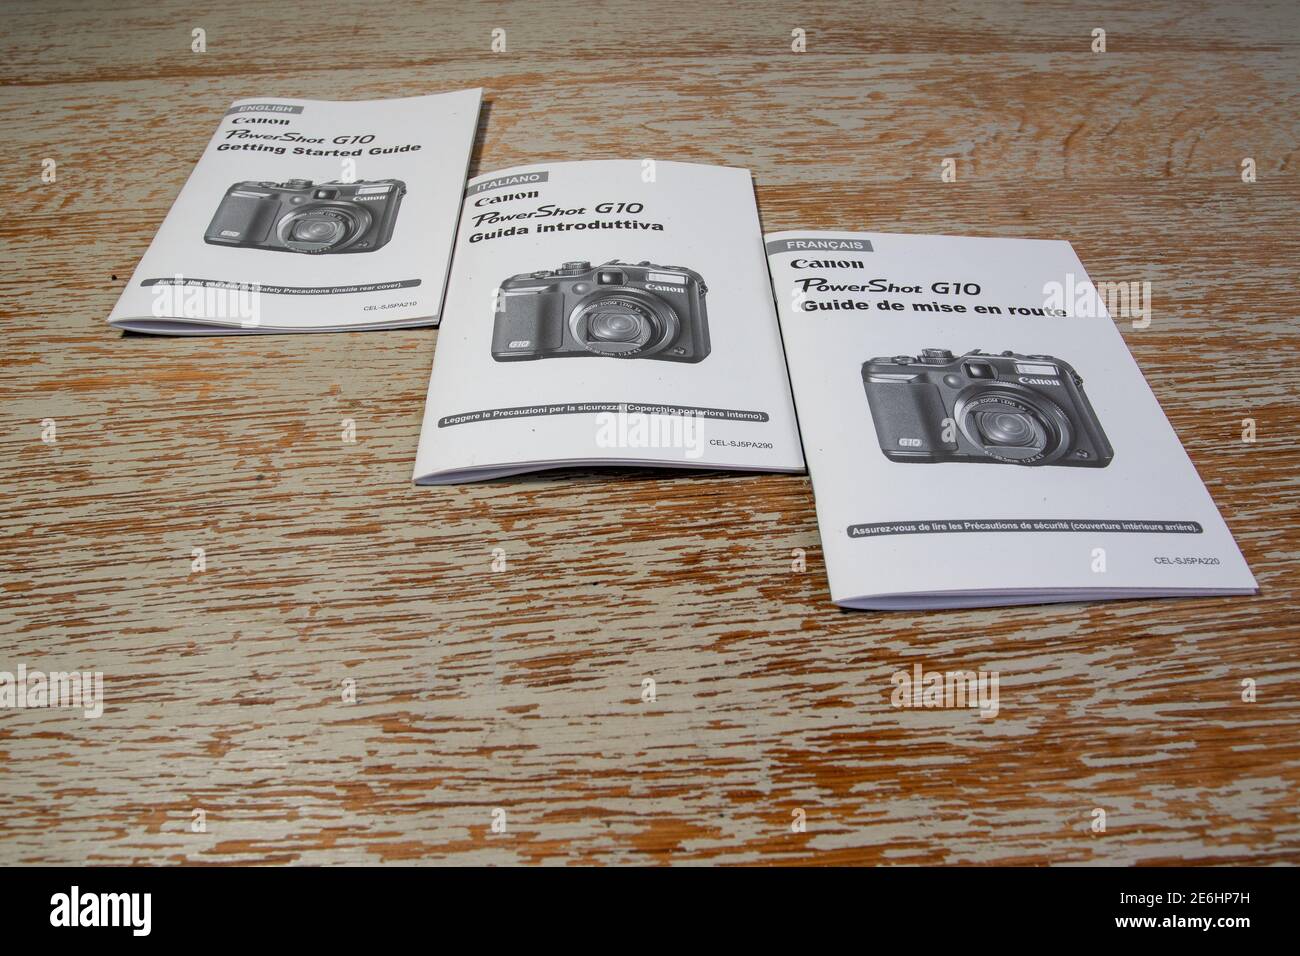 Getting started guides for the Canon G10 compact camera in three languages Stock Photo